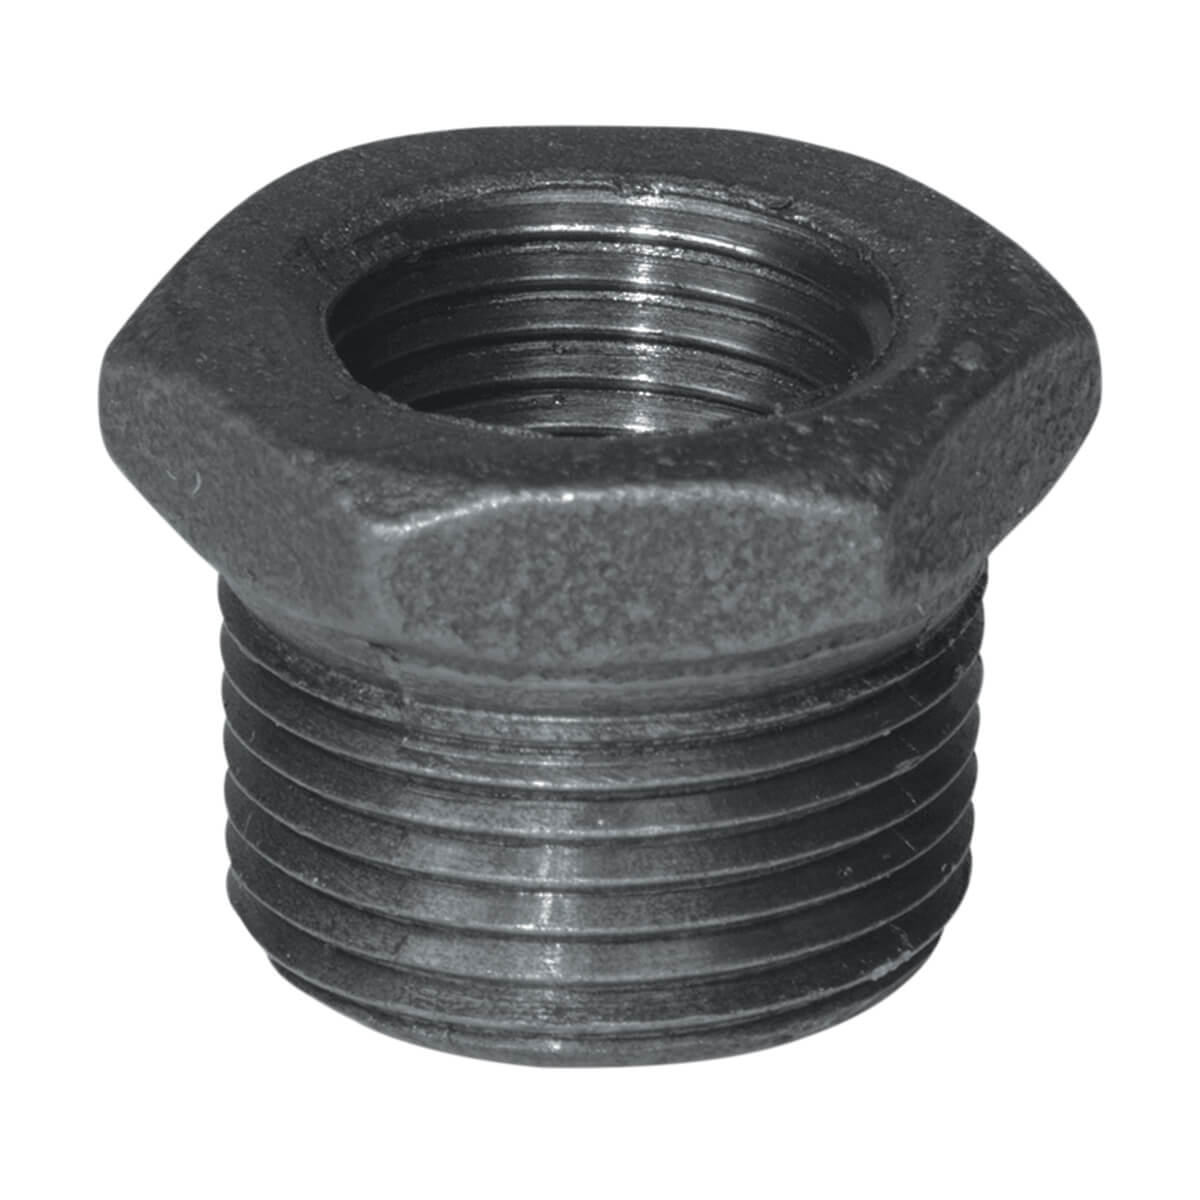 Fitting Black Iron Hex Bushing - 3/4-in x 3/8-in